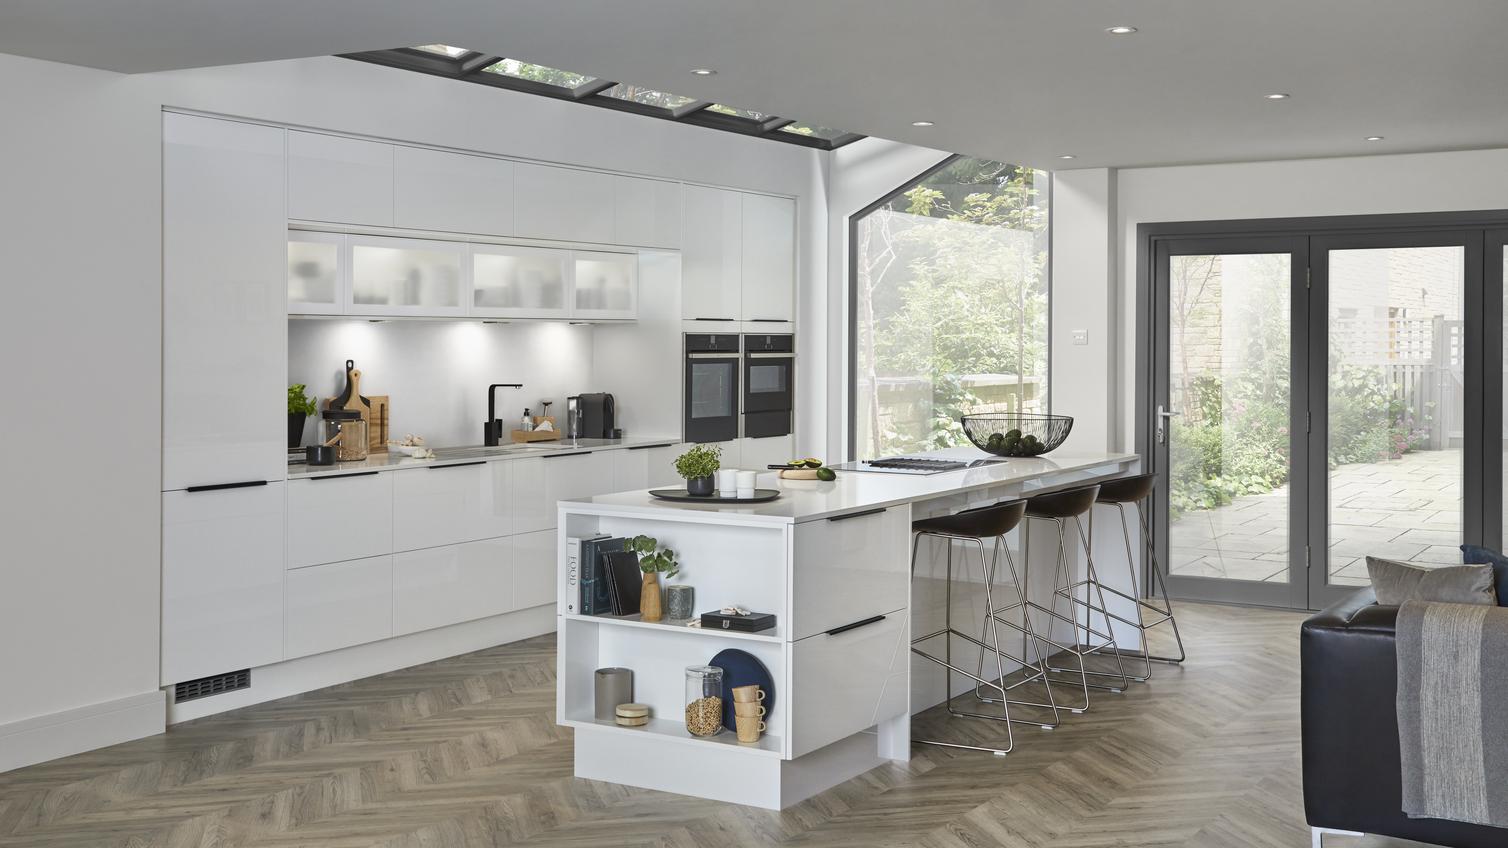 Modern white mirror gloss kitchen with two built in single oven and island unit with breakfast bar and open end shelving.